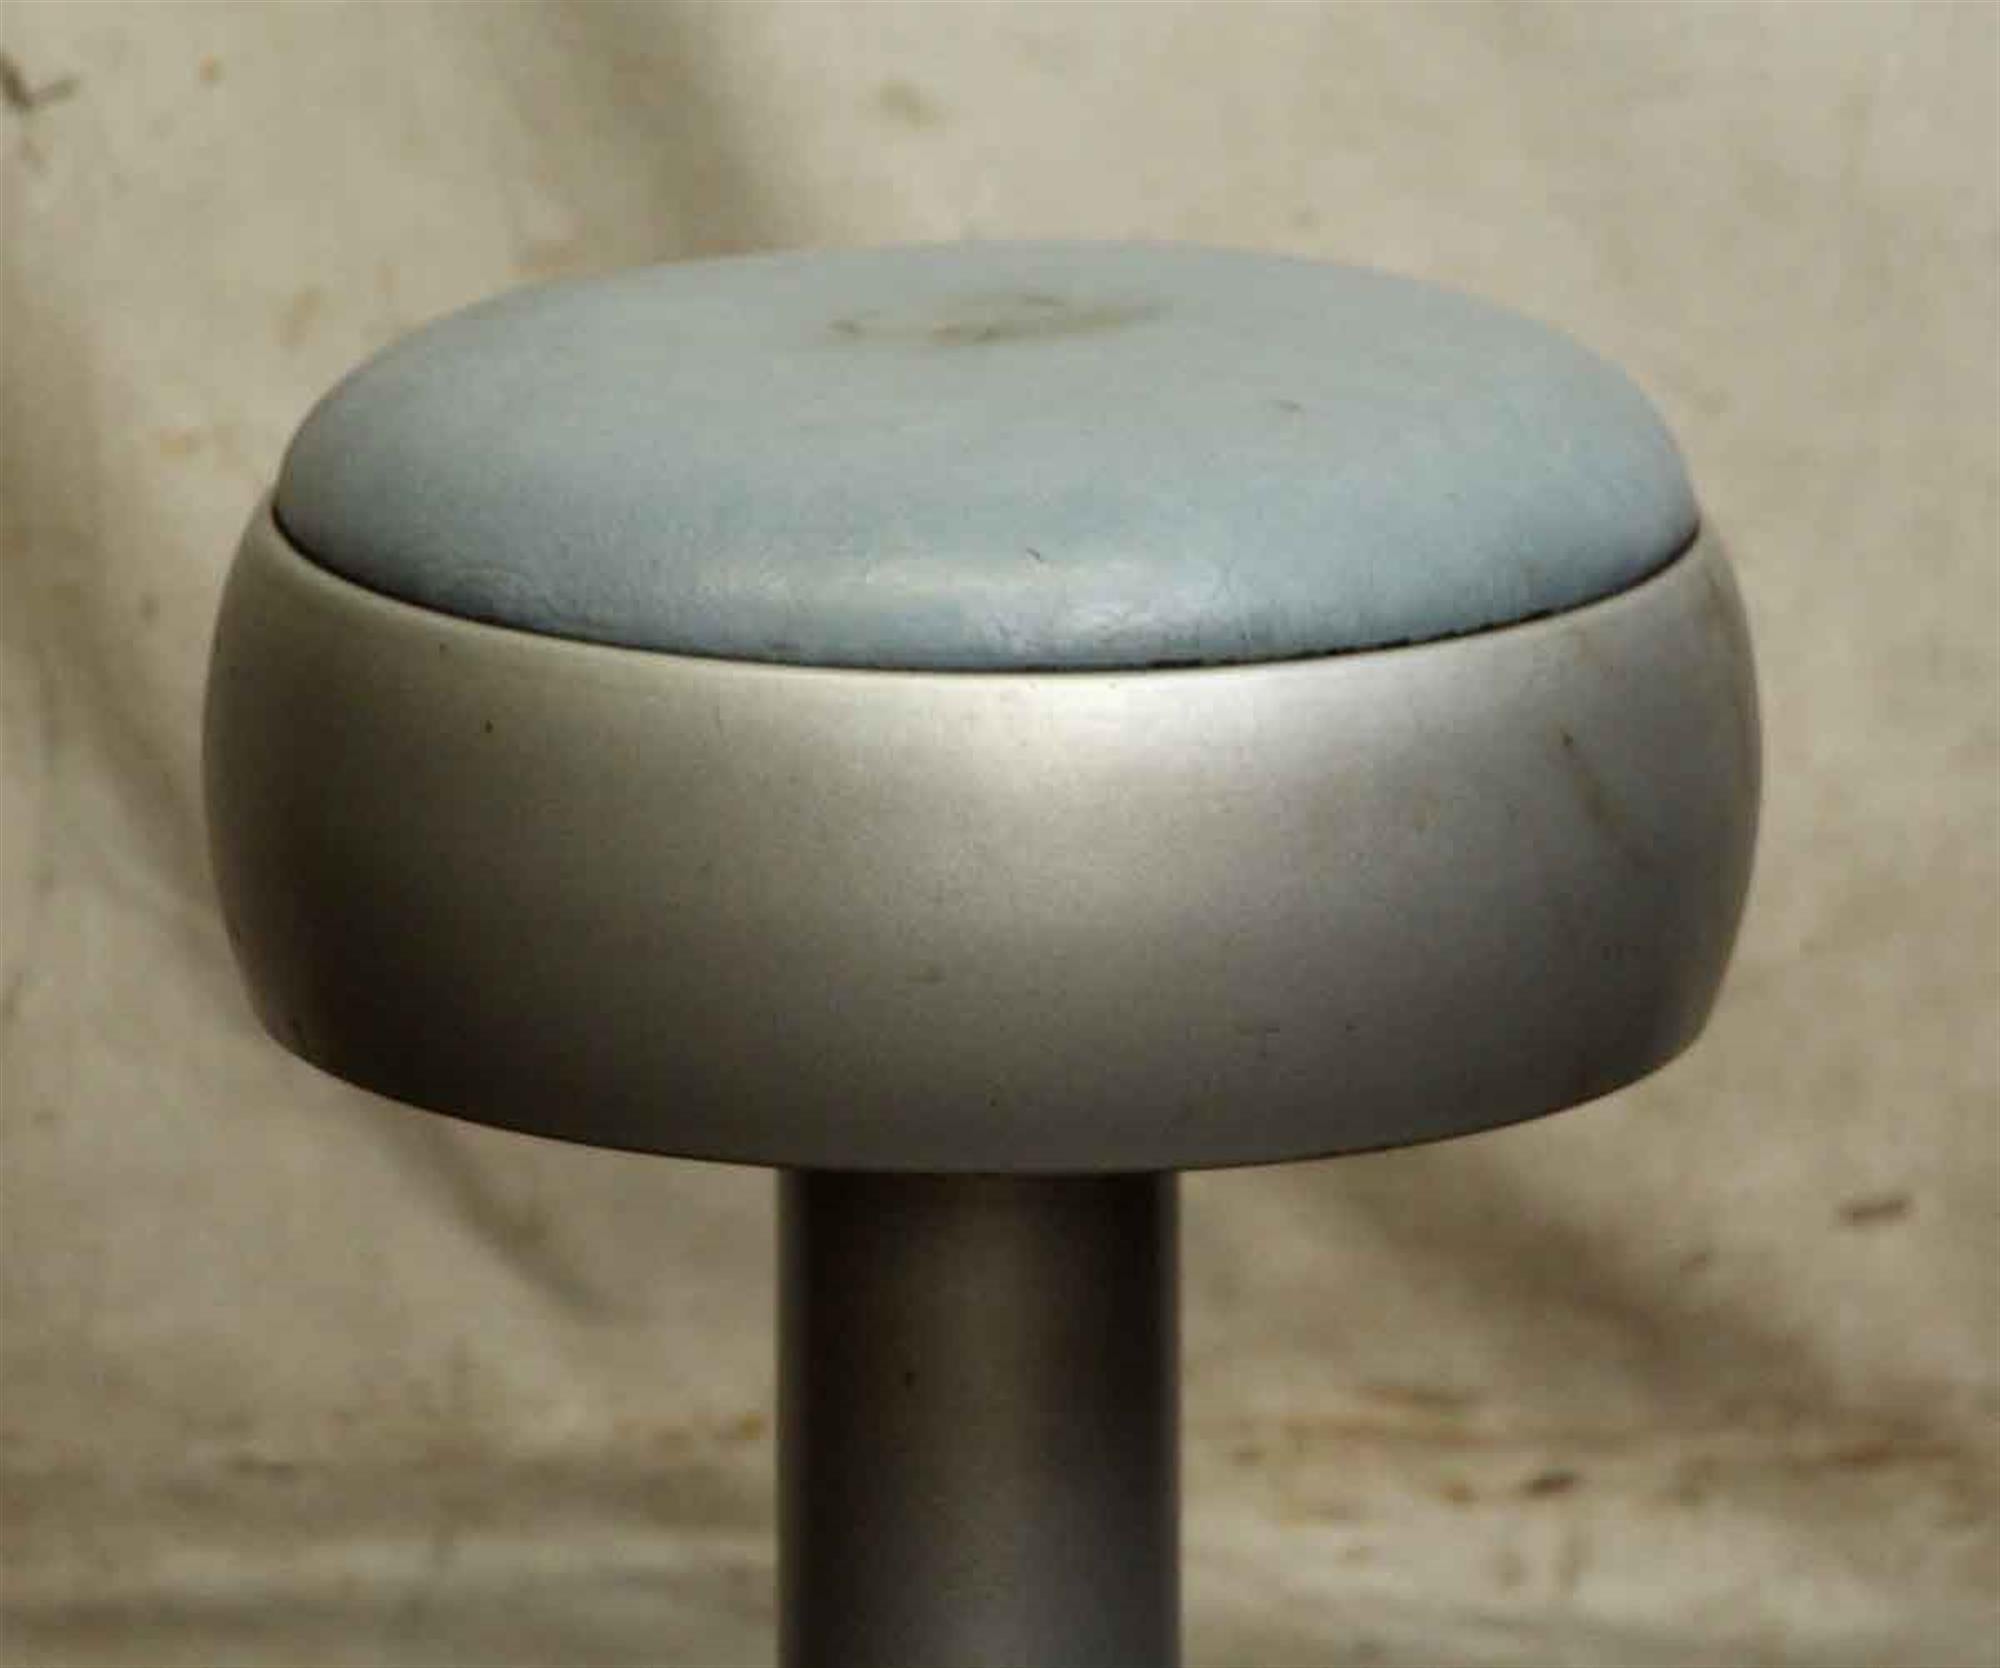 1950s diner stools salvaged from Old Forge PA. In very good condition and are designed to bolt to the floor. Several available at time of posting. Small quantity available at time of posting. Please inquire. Priced each. This can be seen at our 400